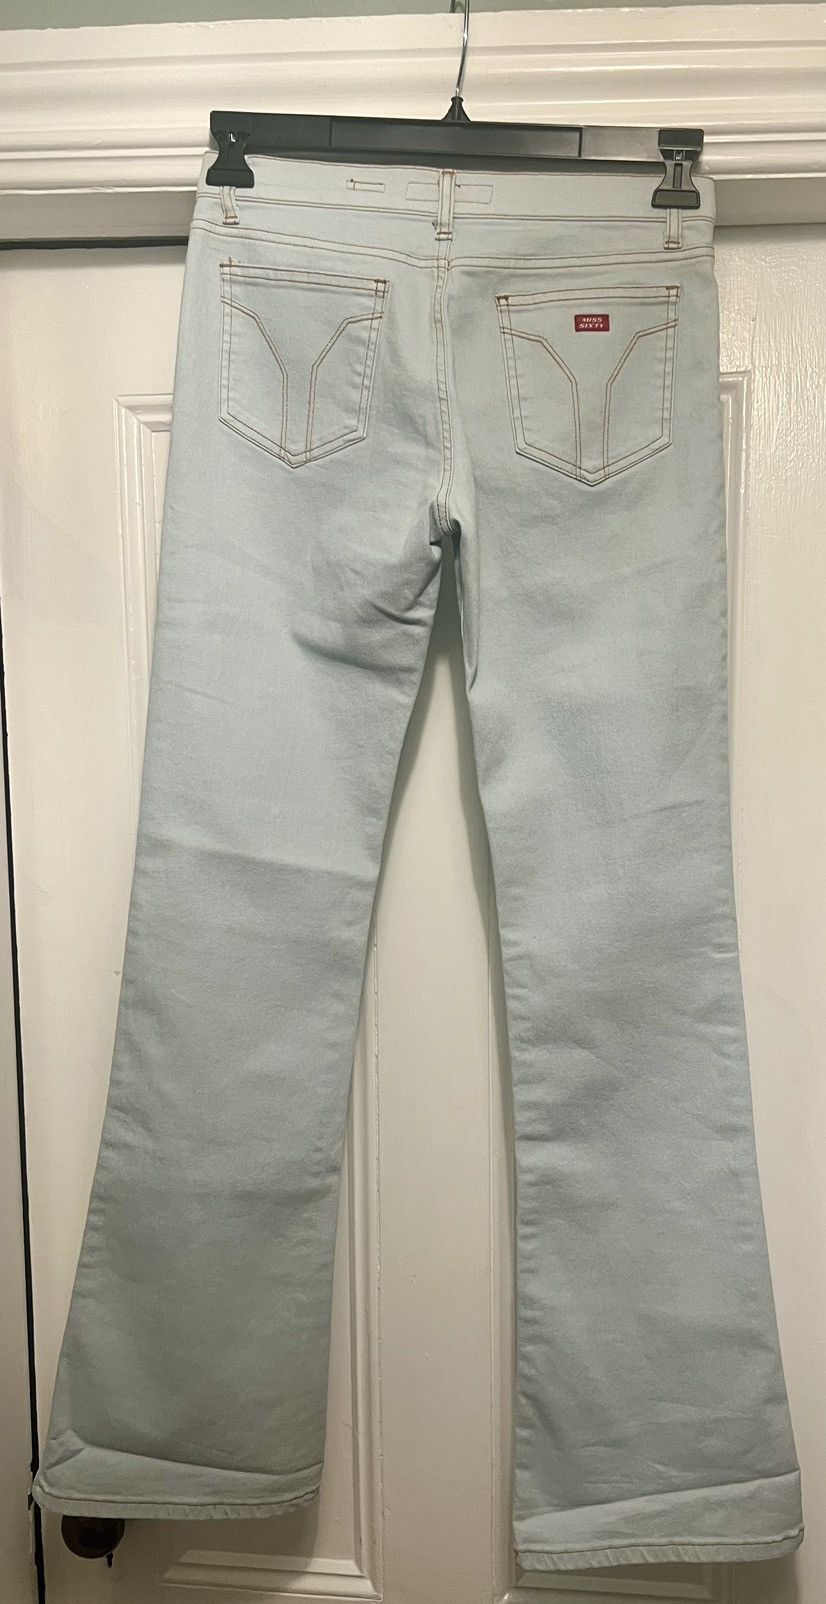 Designer Authentic Miss Sixty Made In Italy Jeans 30 Light Wash Denim Size 30" / US 8 / IT 44 - 4 Thumbnail